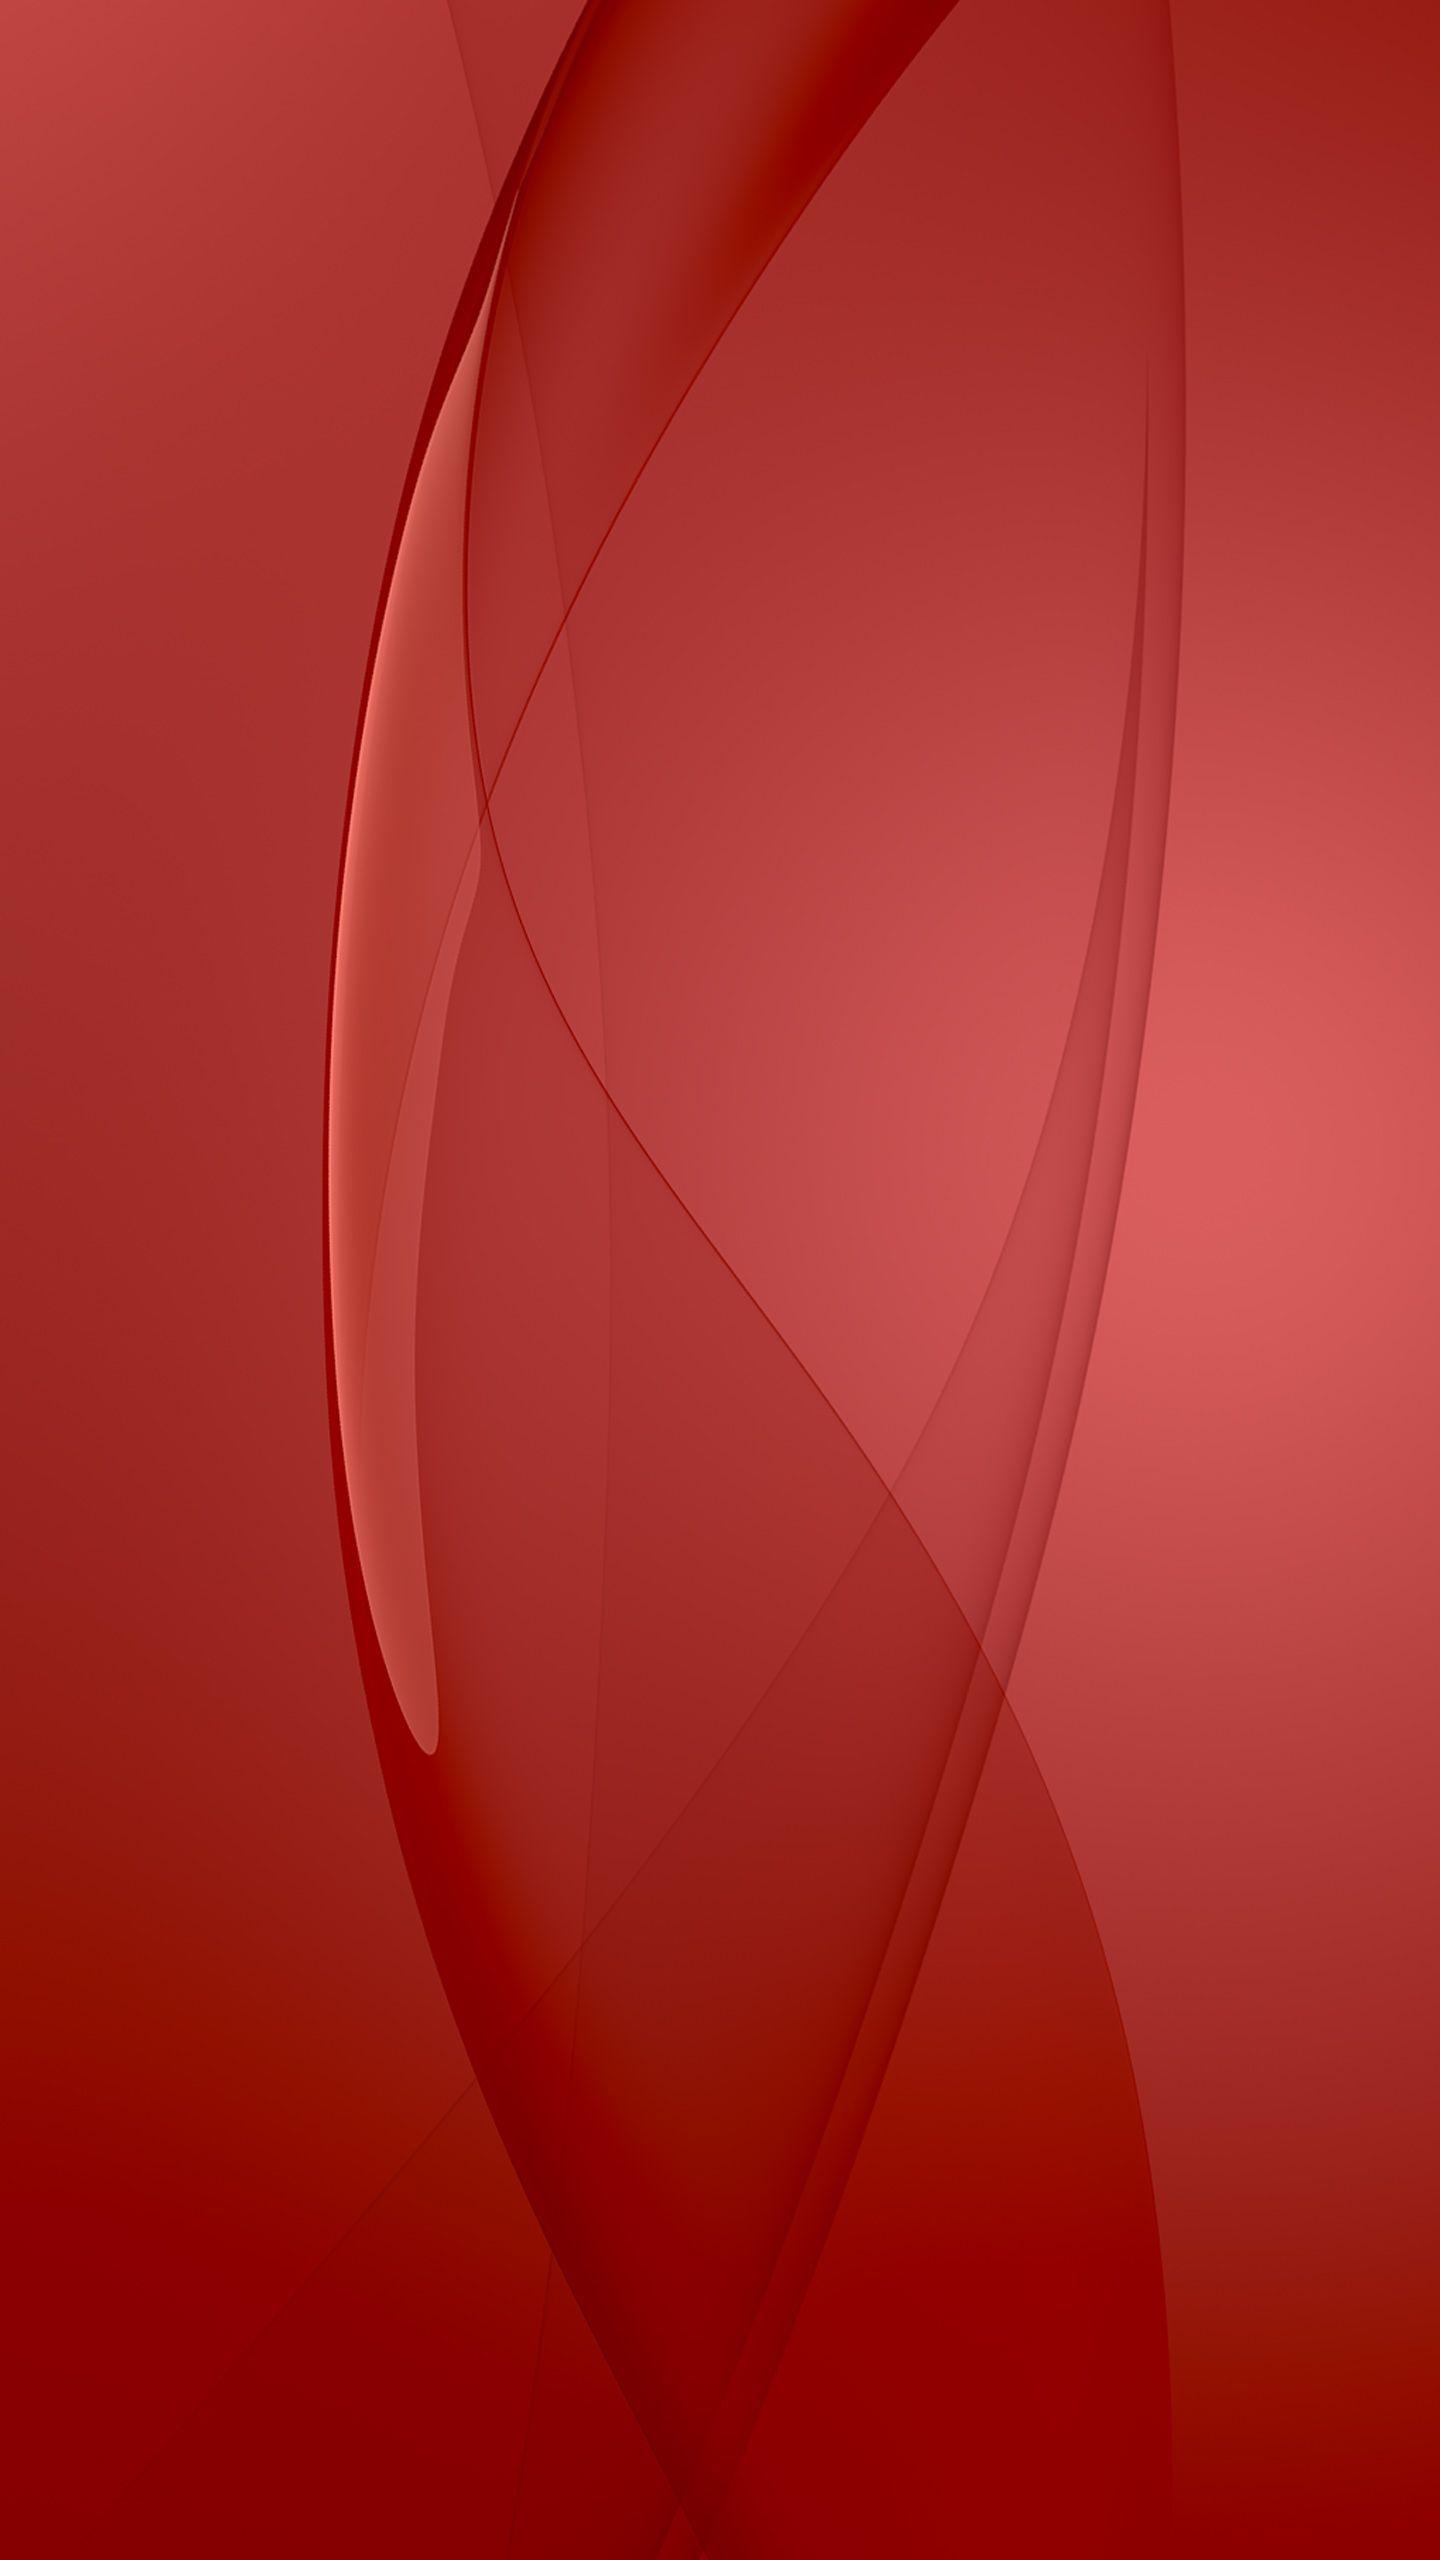 Red Abstract Mobile Wallpaper /red Abstract Mobile Wallpaper. Mobile Wallpaper, Cellphone Wallpaper, Abstract